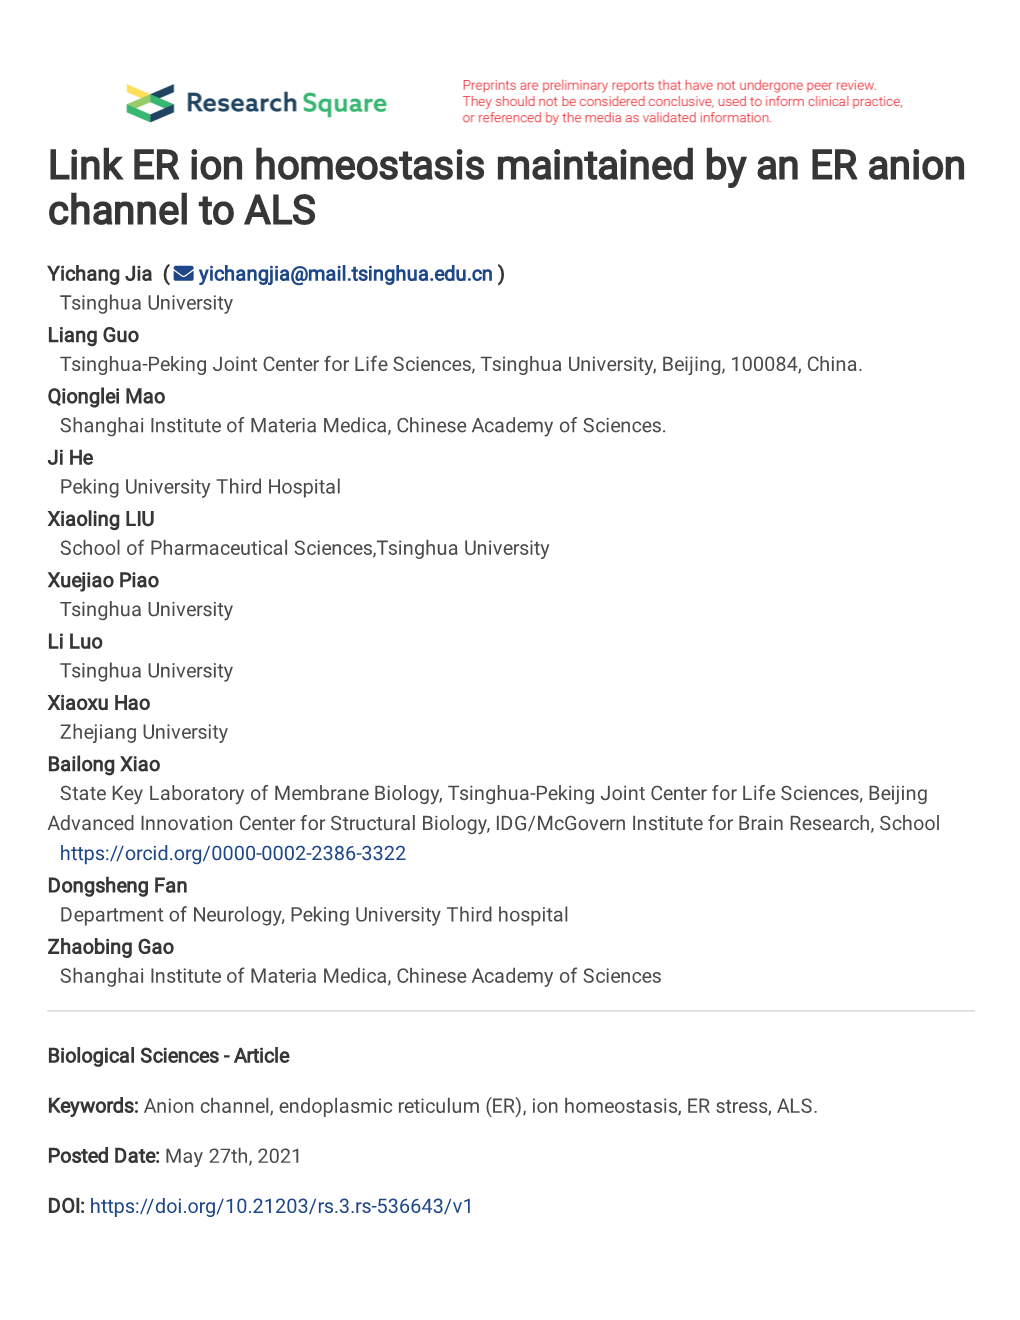 Link ER Ion Homeostasis Maintained by an ER Anion Channel to ALS